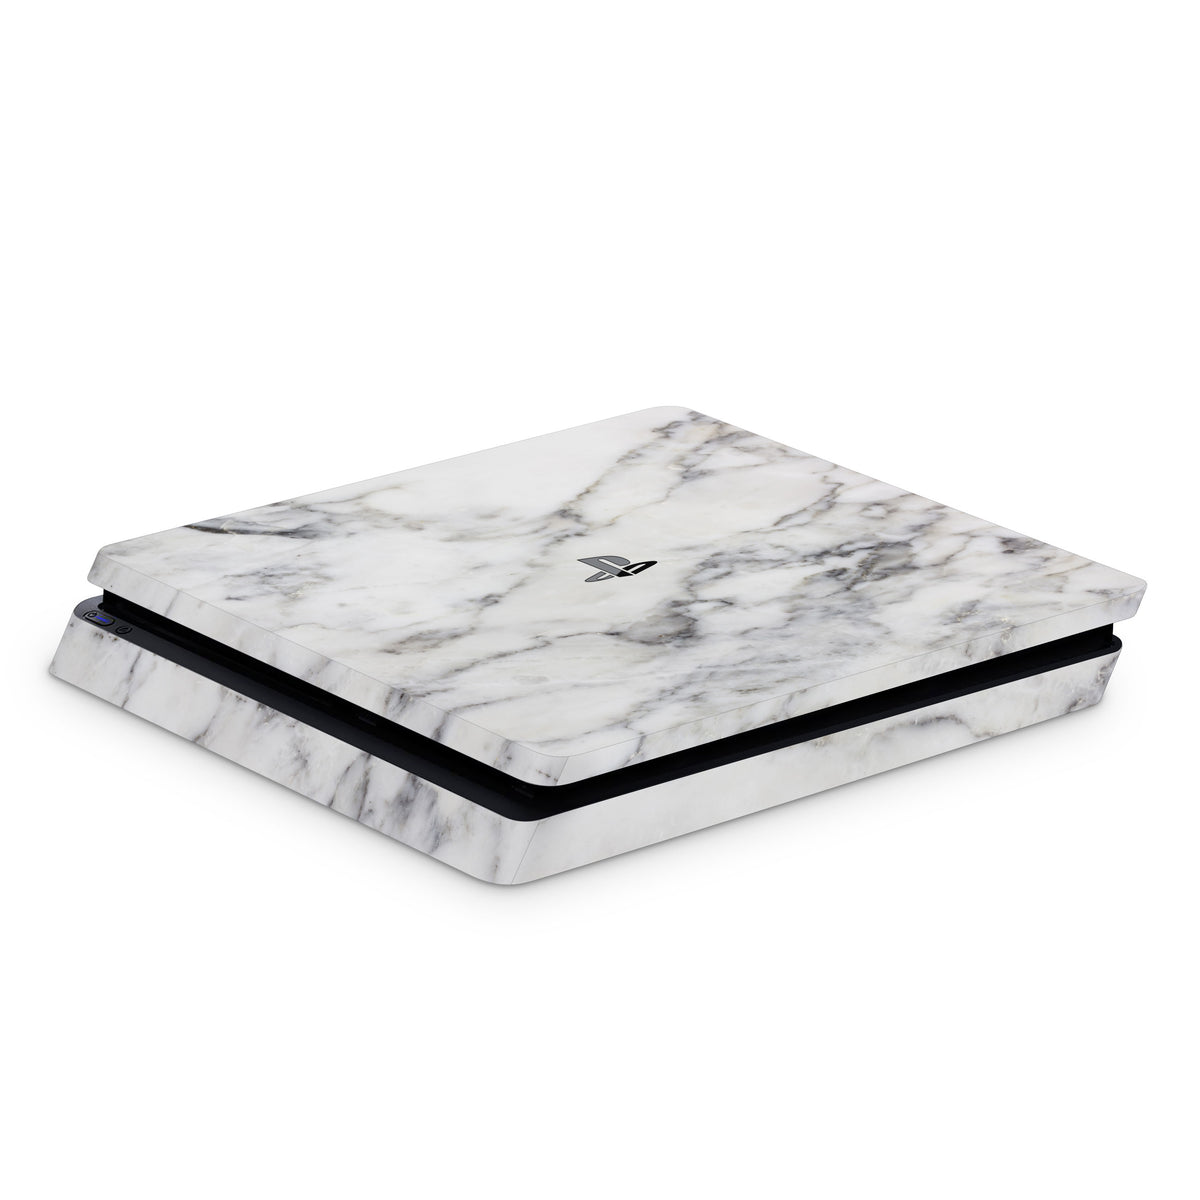 Classic White Marble PS4 Slim Console Skin